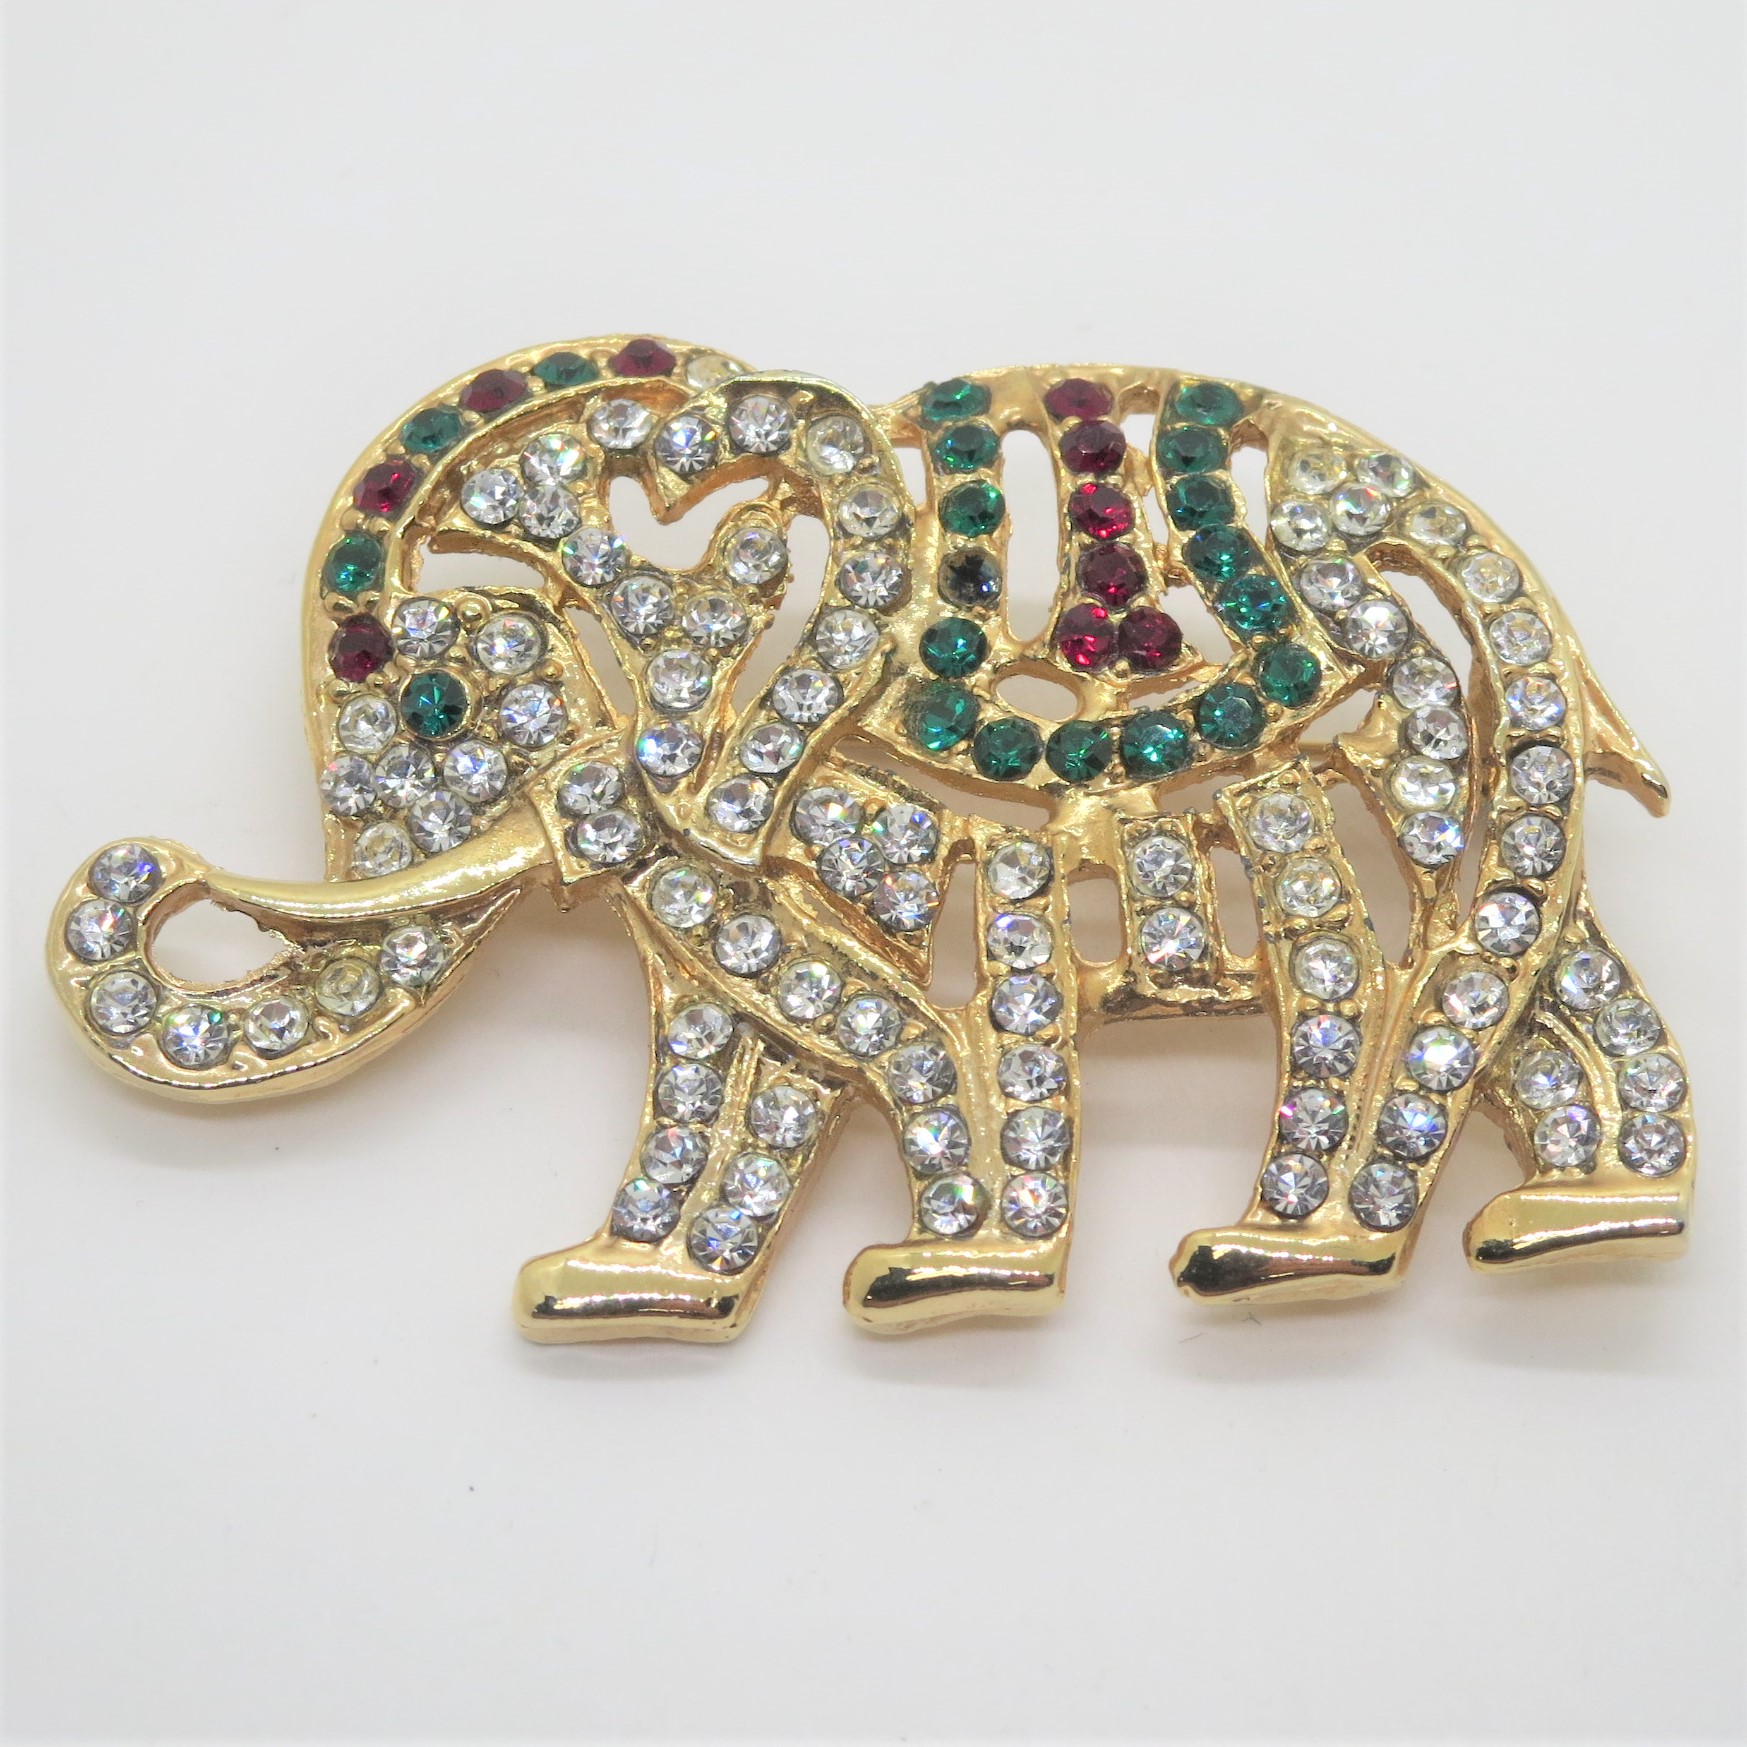 Exquisite White Elephant Brooches